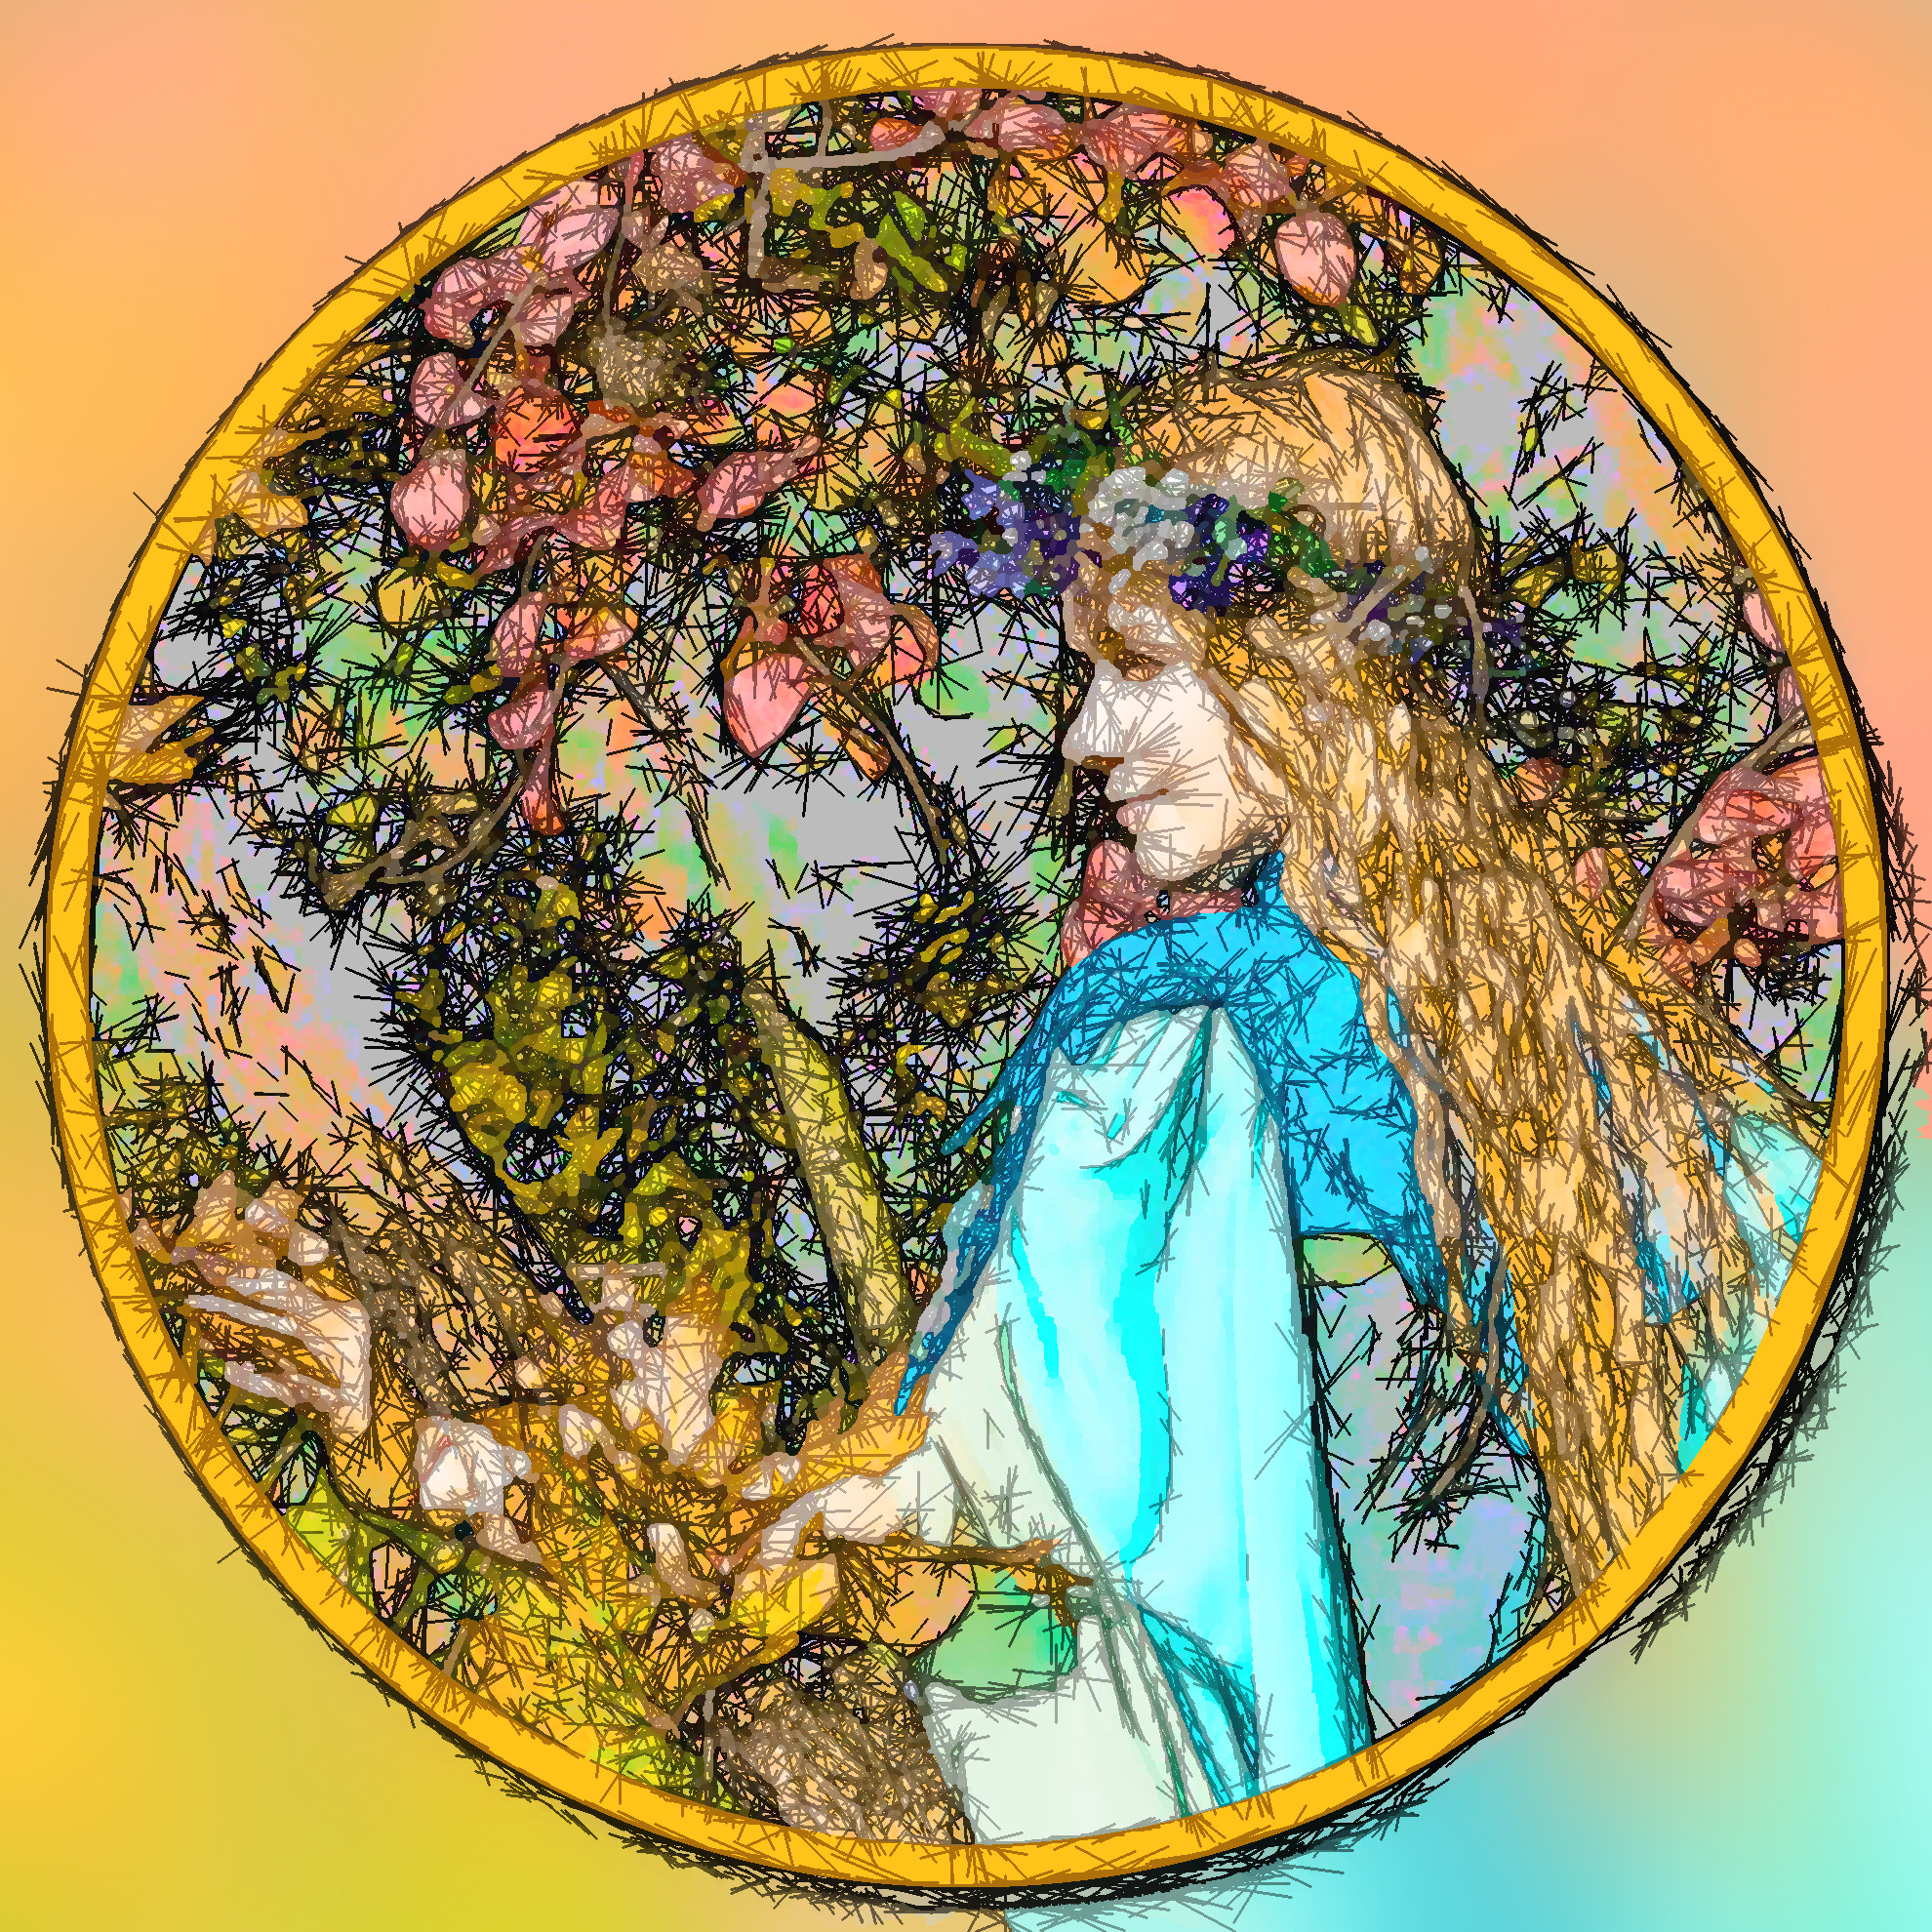 2023-05-26 08-40-37costume__rainy_forest__by_aquilina108_dbytkth-fullview_portrait with a framed Artistic effect, style FeltPen.jpg